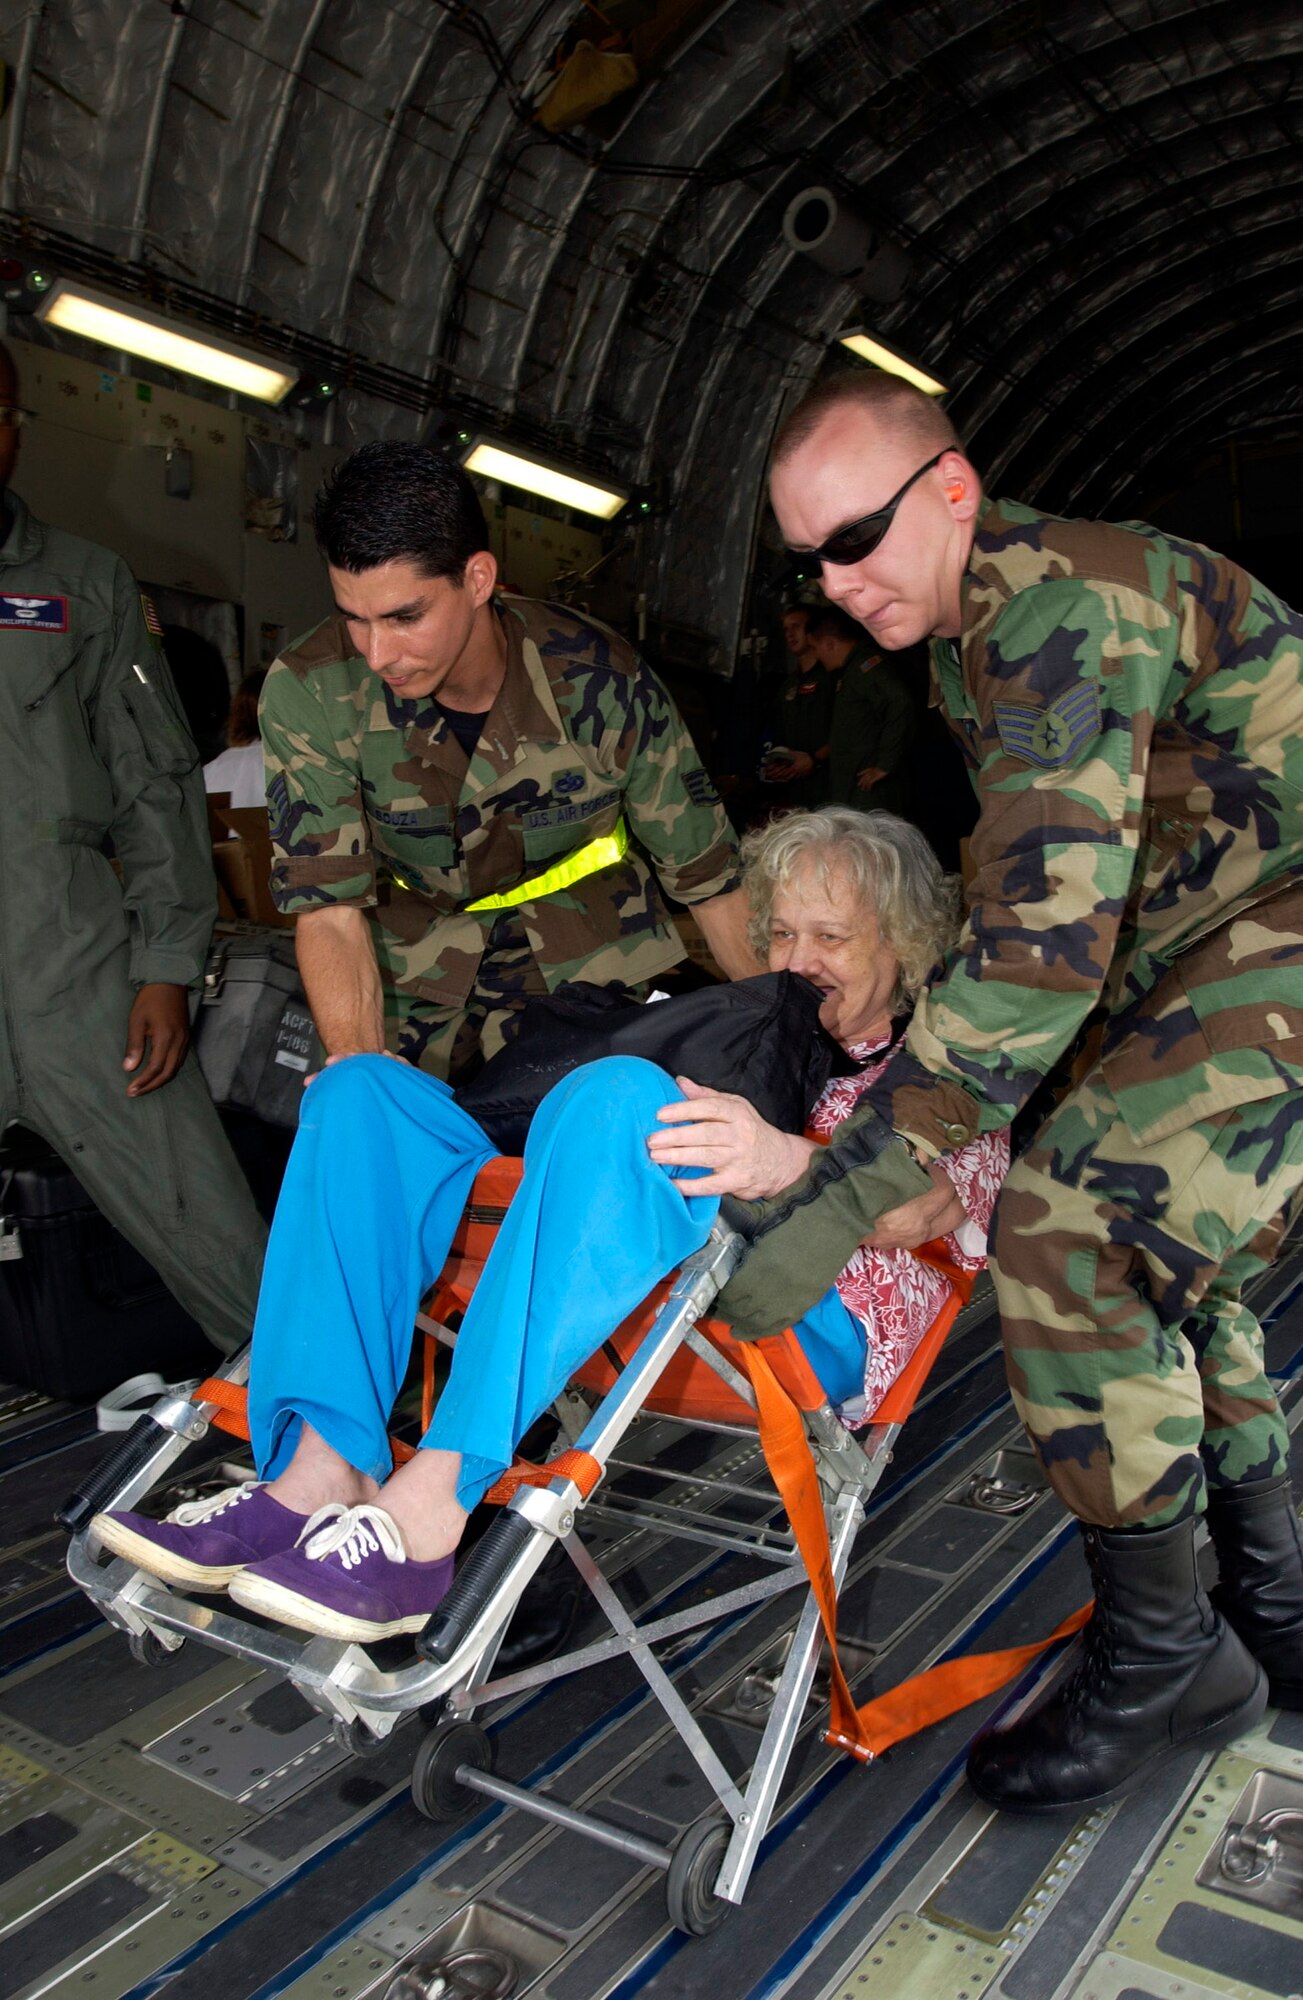 LACKLAND AIR FORCE BASE, Texas -- Staff Sgt. John Souza (left) and Staff Sgt. Michael Vonahmen (right), help Hurricane Katrina evacuees get off a C-17 Globemaster III here.  The evacuees arrived Sept. 2 from New Orleans. They are being inprocessed, given a medical checkup, fed and put into temporary shelters.  The Airmen are assigned to the 343rd Training Squadron.  (U.S. Air Force photo by Tech. Sgt. Mark Borosch)